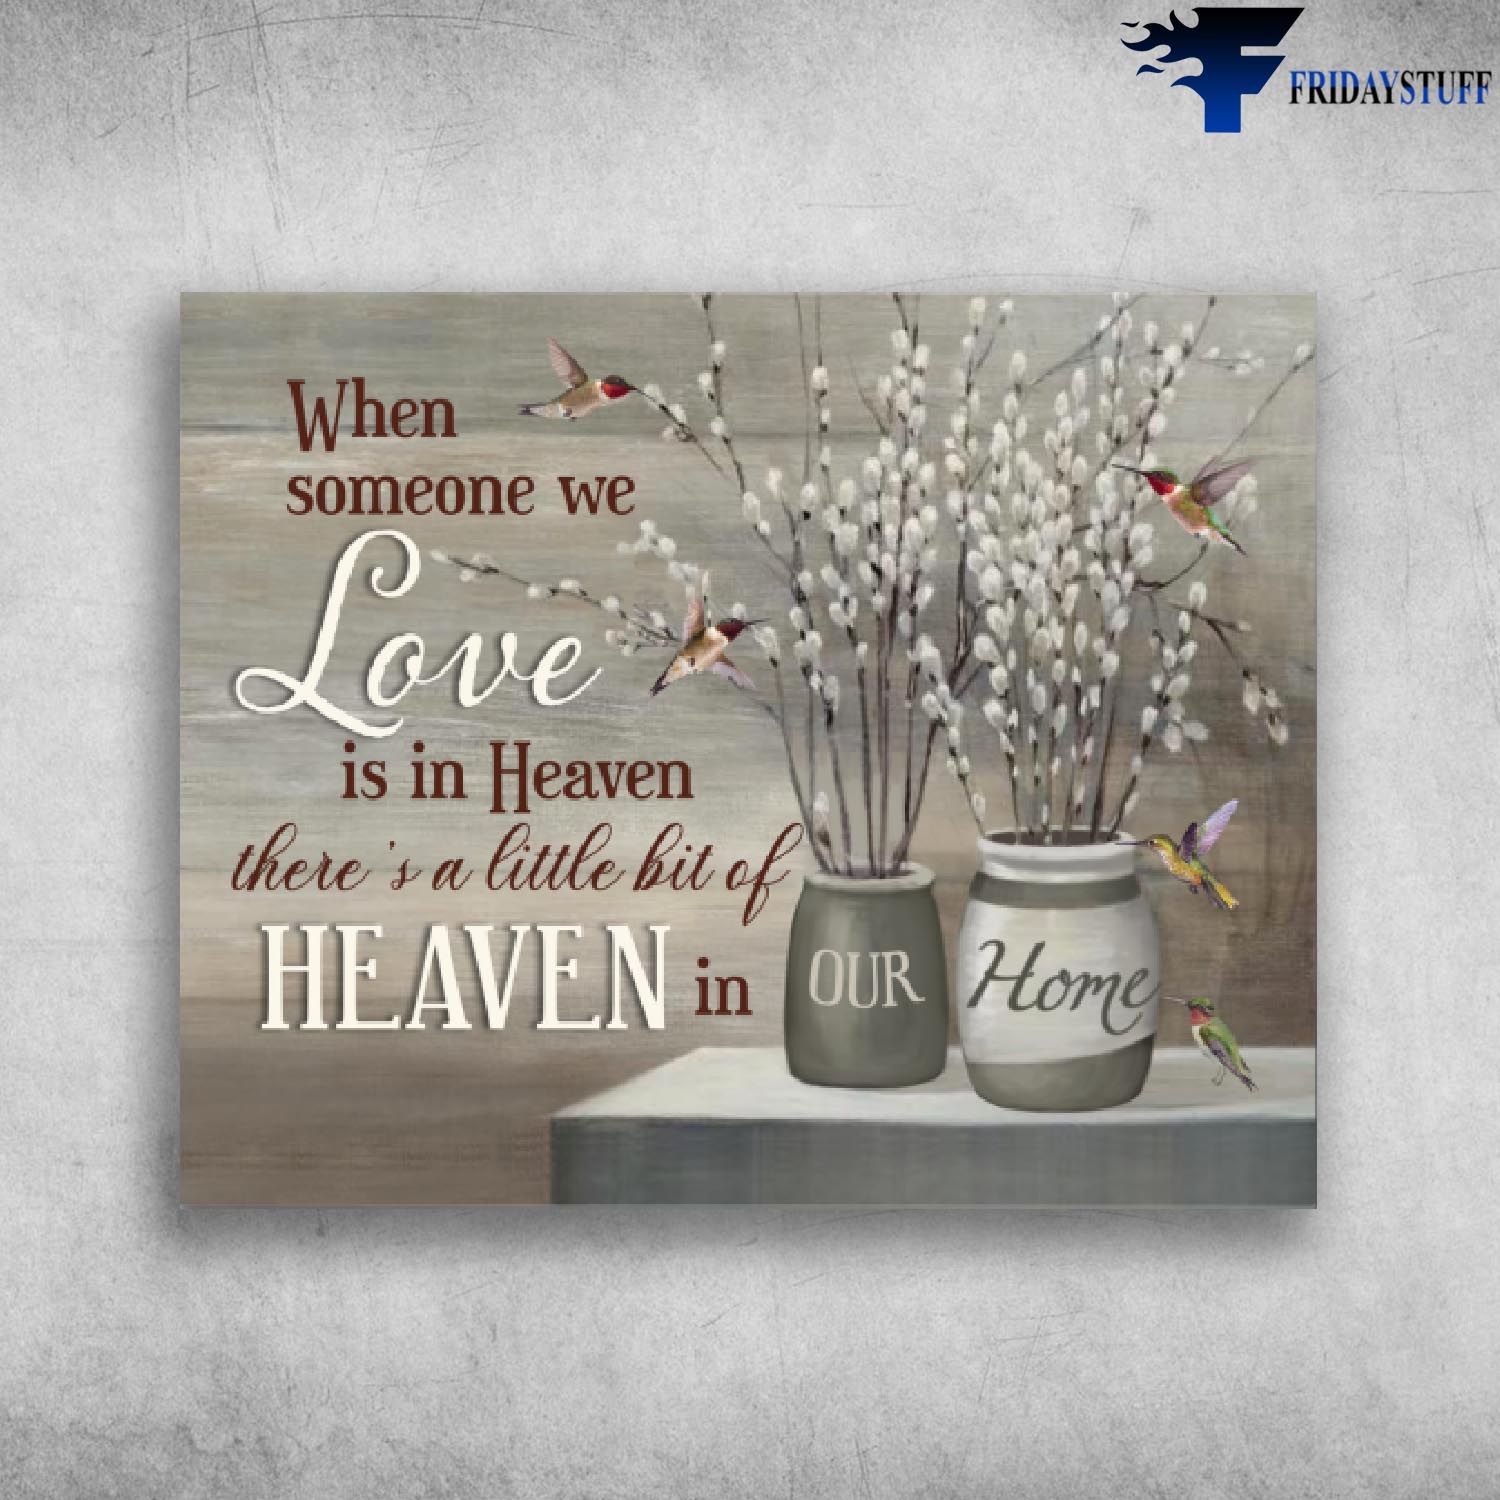 When Someone We Love Is In Heaven There's a little bit of Heaven In Our Home